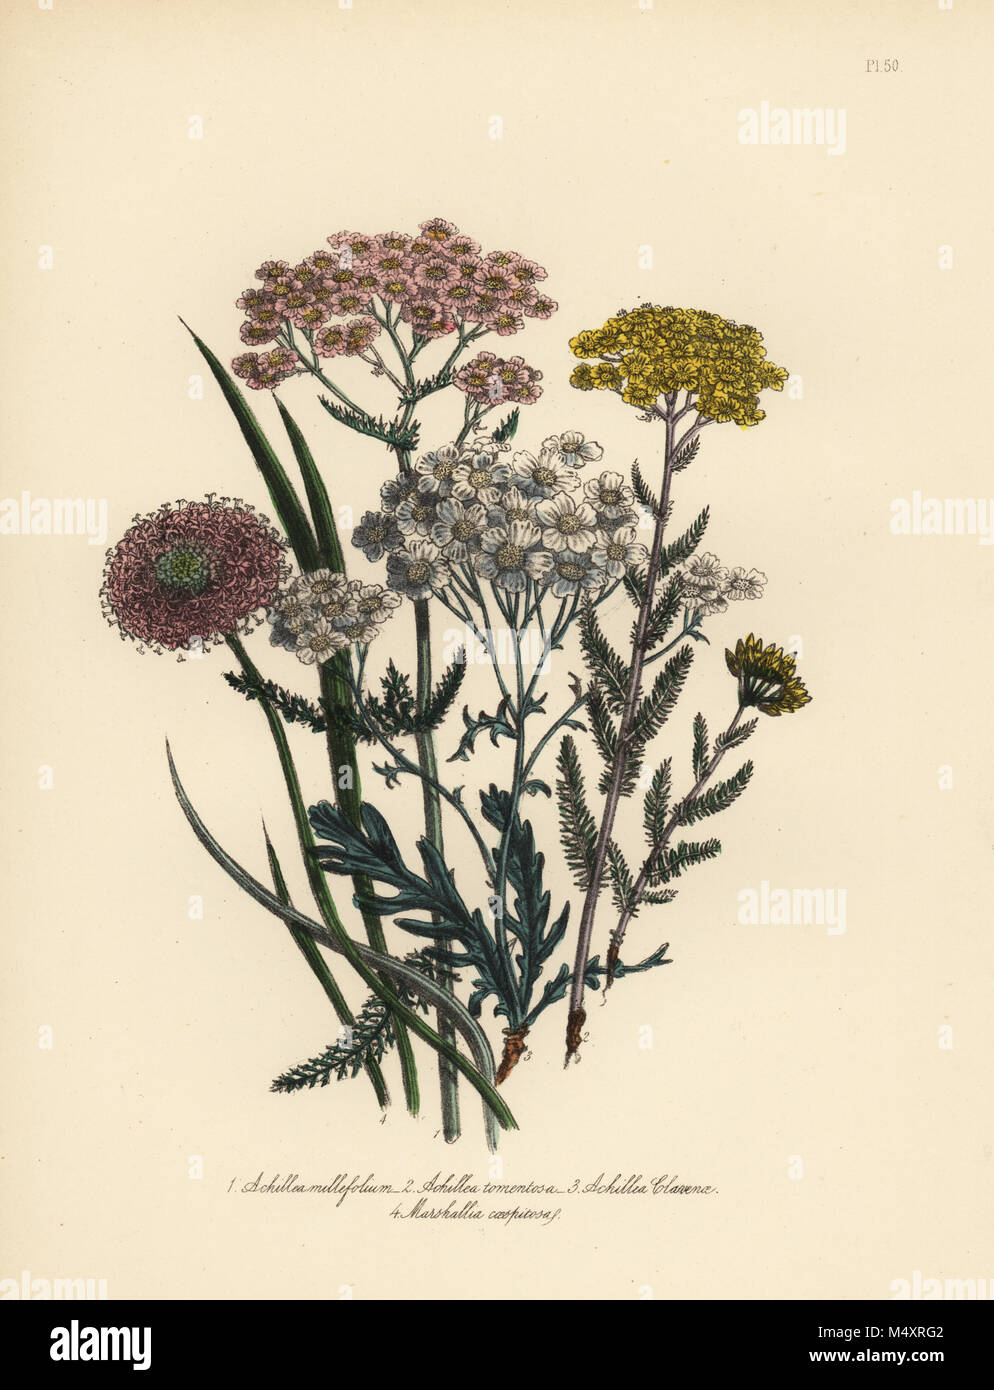 Pink-flowered milfoil, Achillea milfolium, golden yarrow, Achillea tomentosa, Clavena's silvery-leaved milfoil, Achillea clavenae, and tufted marshallia, Marshallia caespitosa. Handfinished chromolithograph by Henry Noel Humphreys after an illustration by Jane Loudon from Mrs. Jane Loudon's Ladies Flower Garden of Ornamental Perennials, William S. Orr, London, 1849. Stock Photo